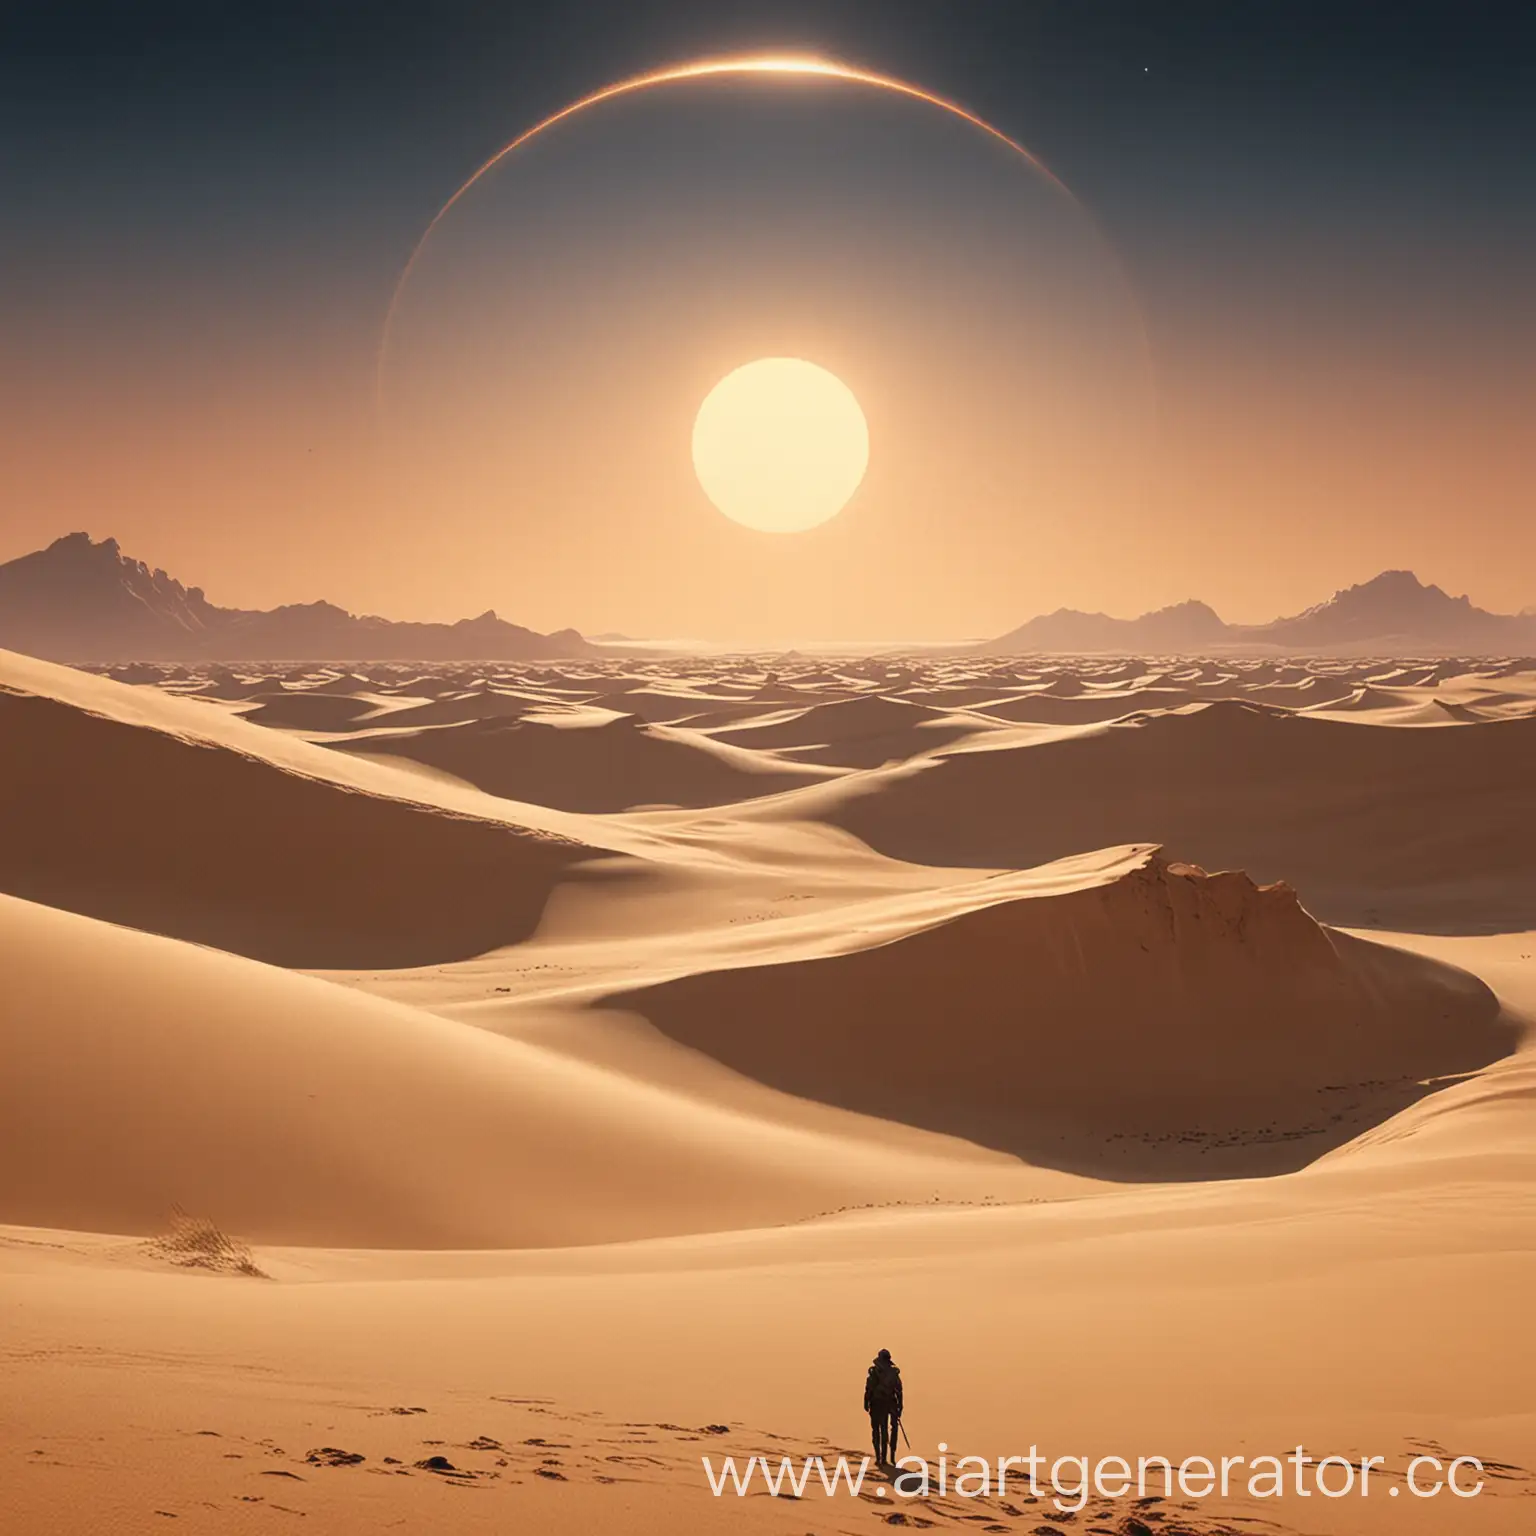 Dune-Landscape-MovieStyle-Poster-Background